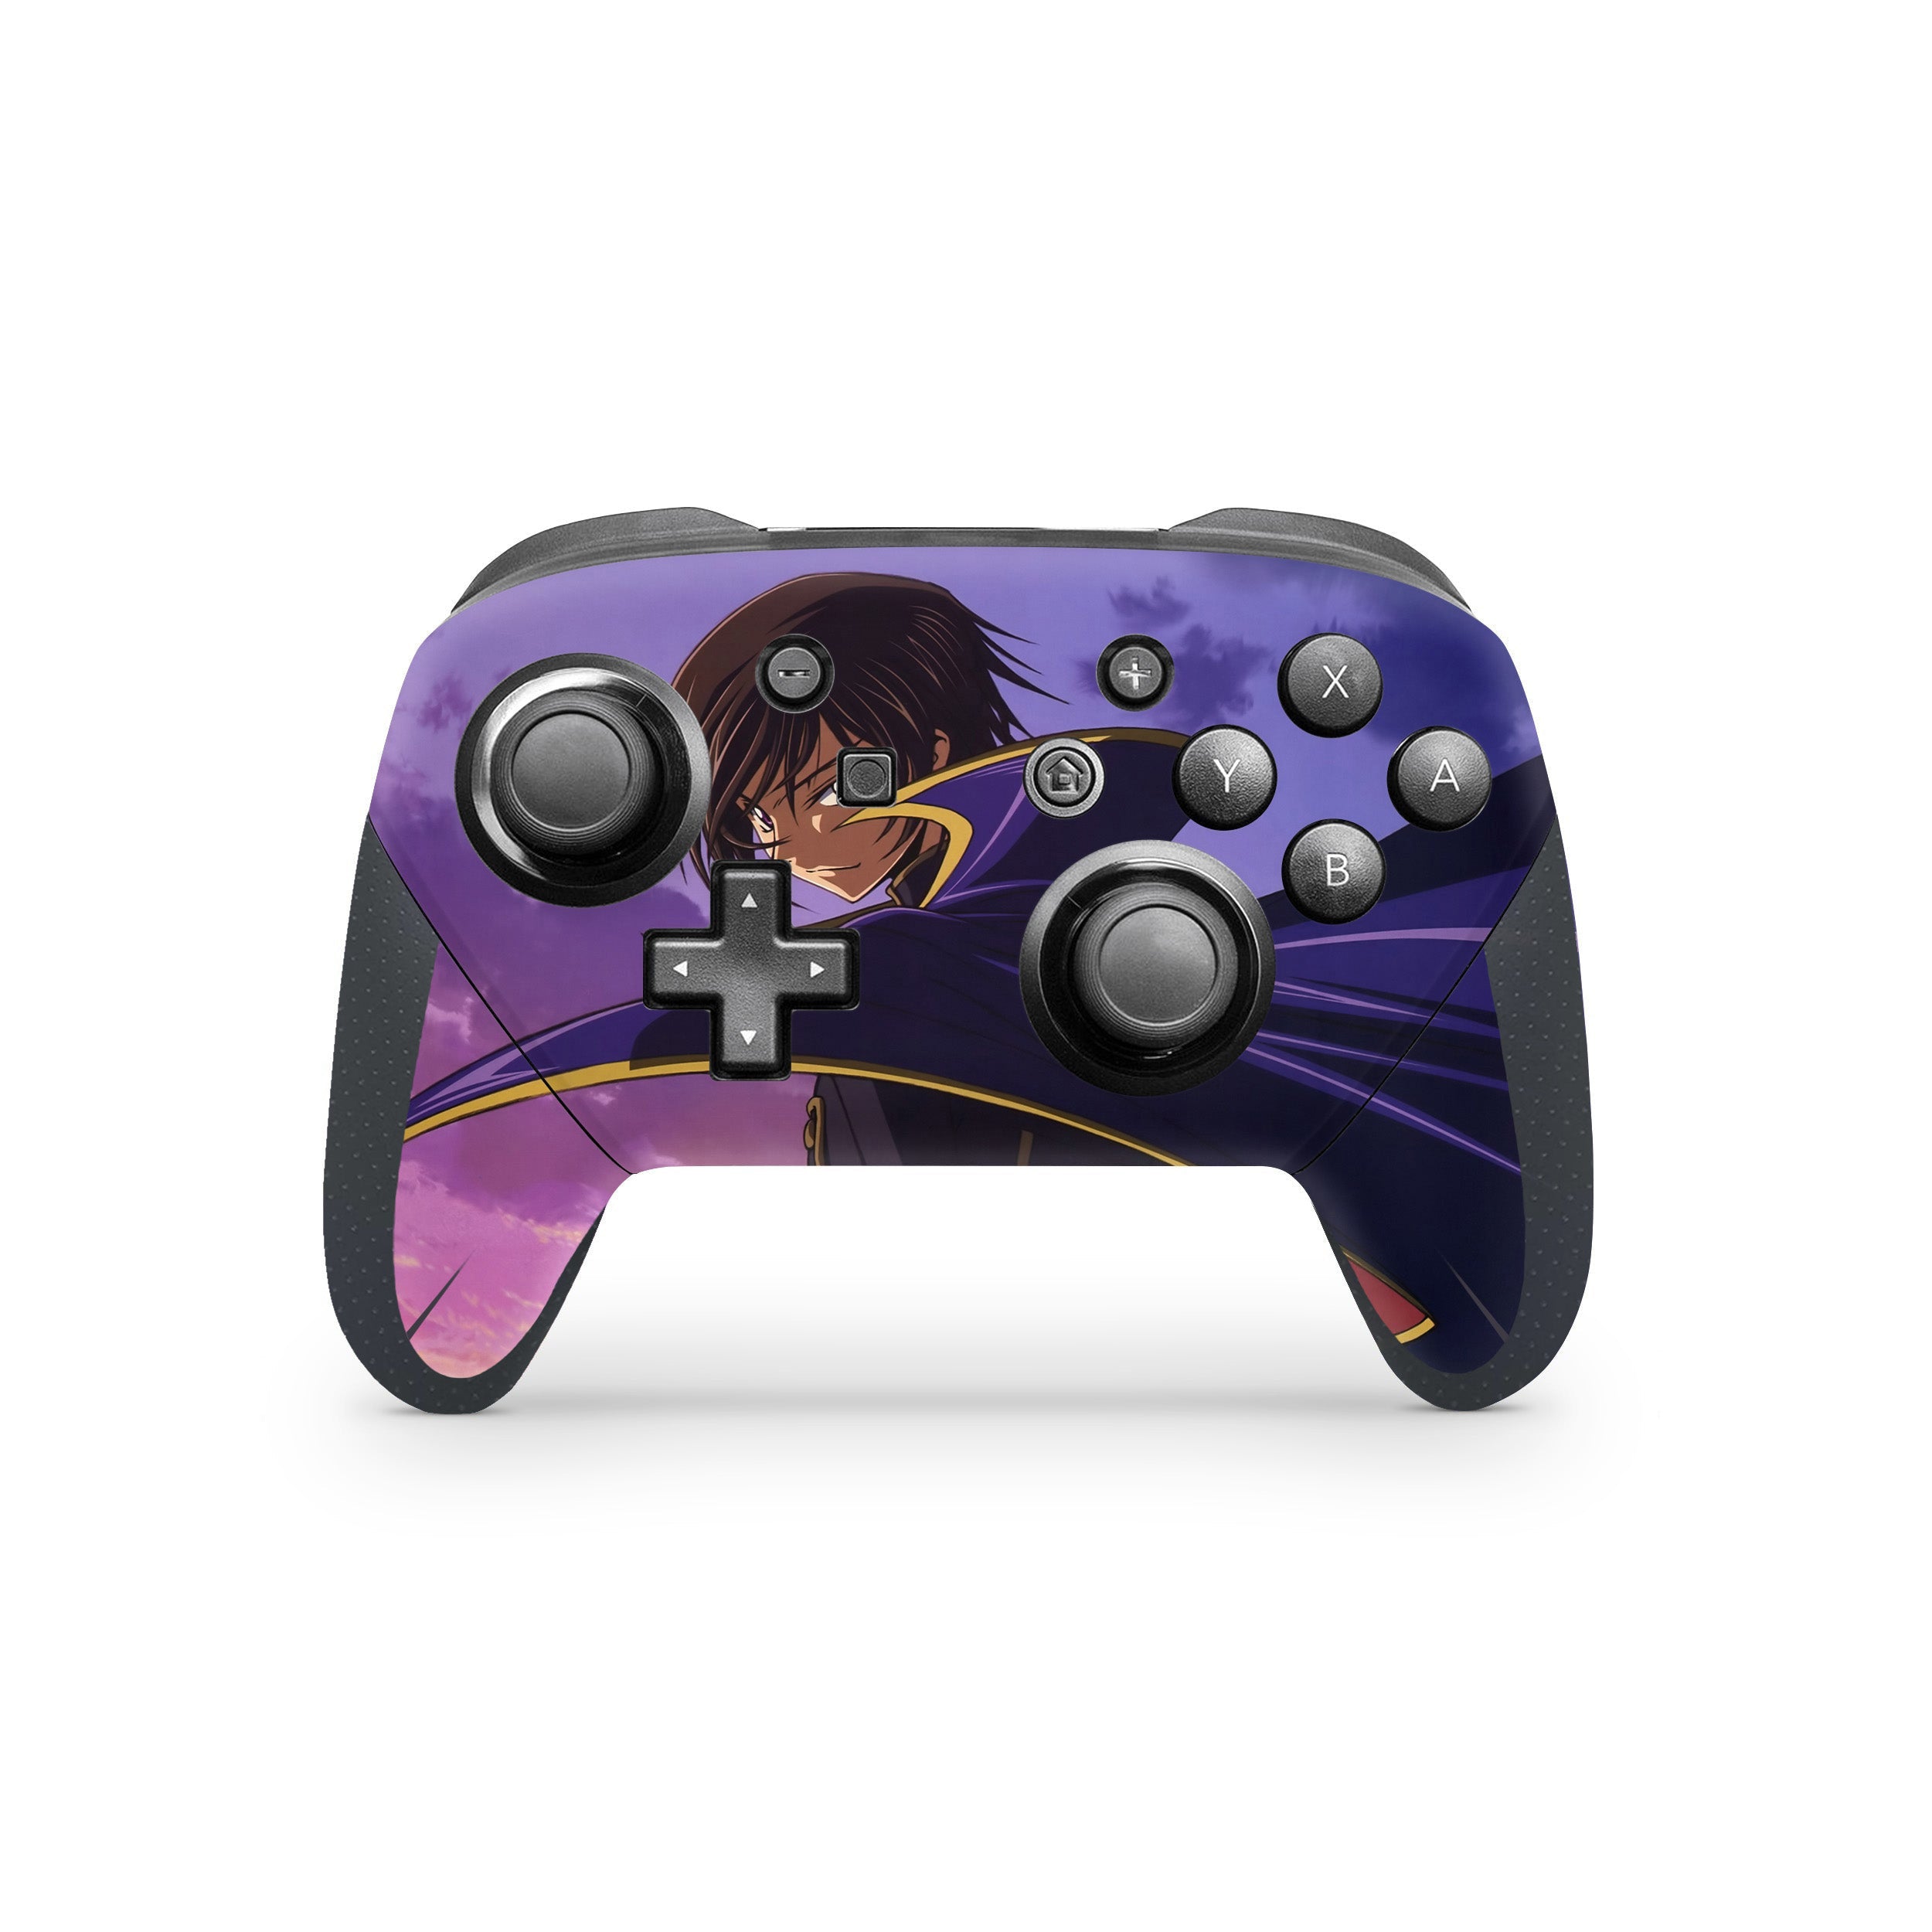 A video game skin featuring a Code Geass Lelouch Lamperoug design for the Switch Pro Controller.